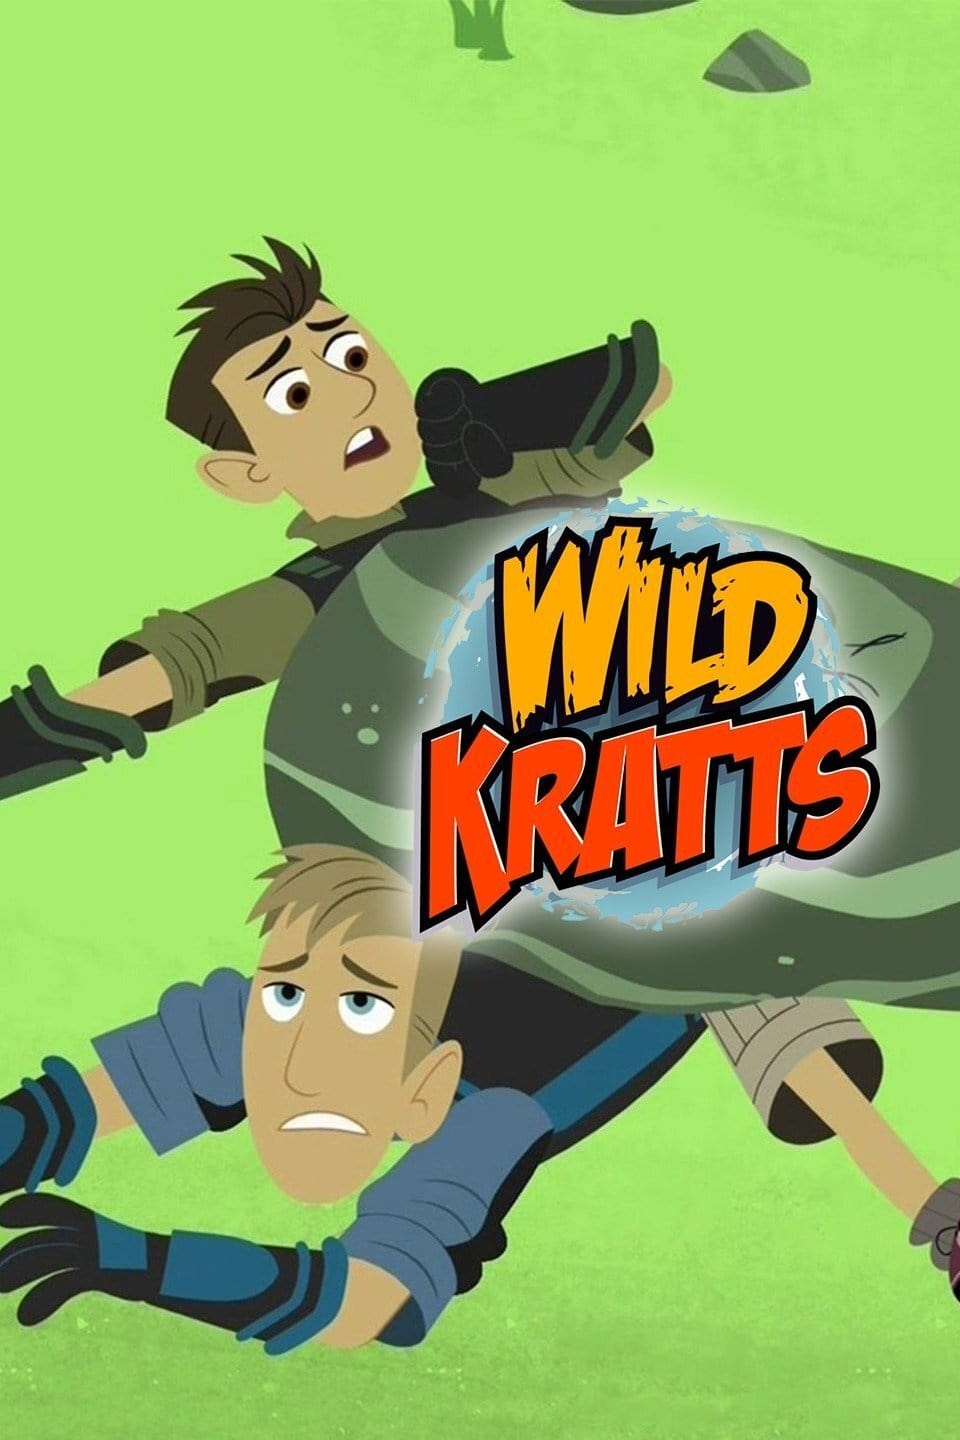 The adventures of Chris and Martin Kratt as they encounter incredible wild ...